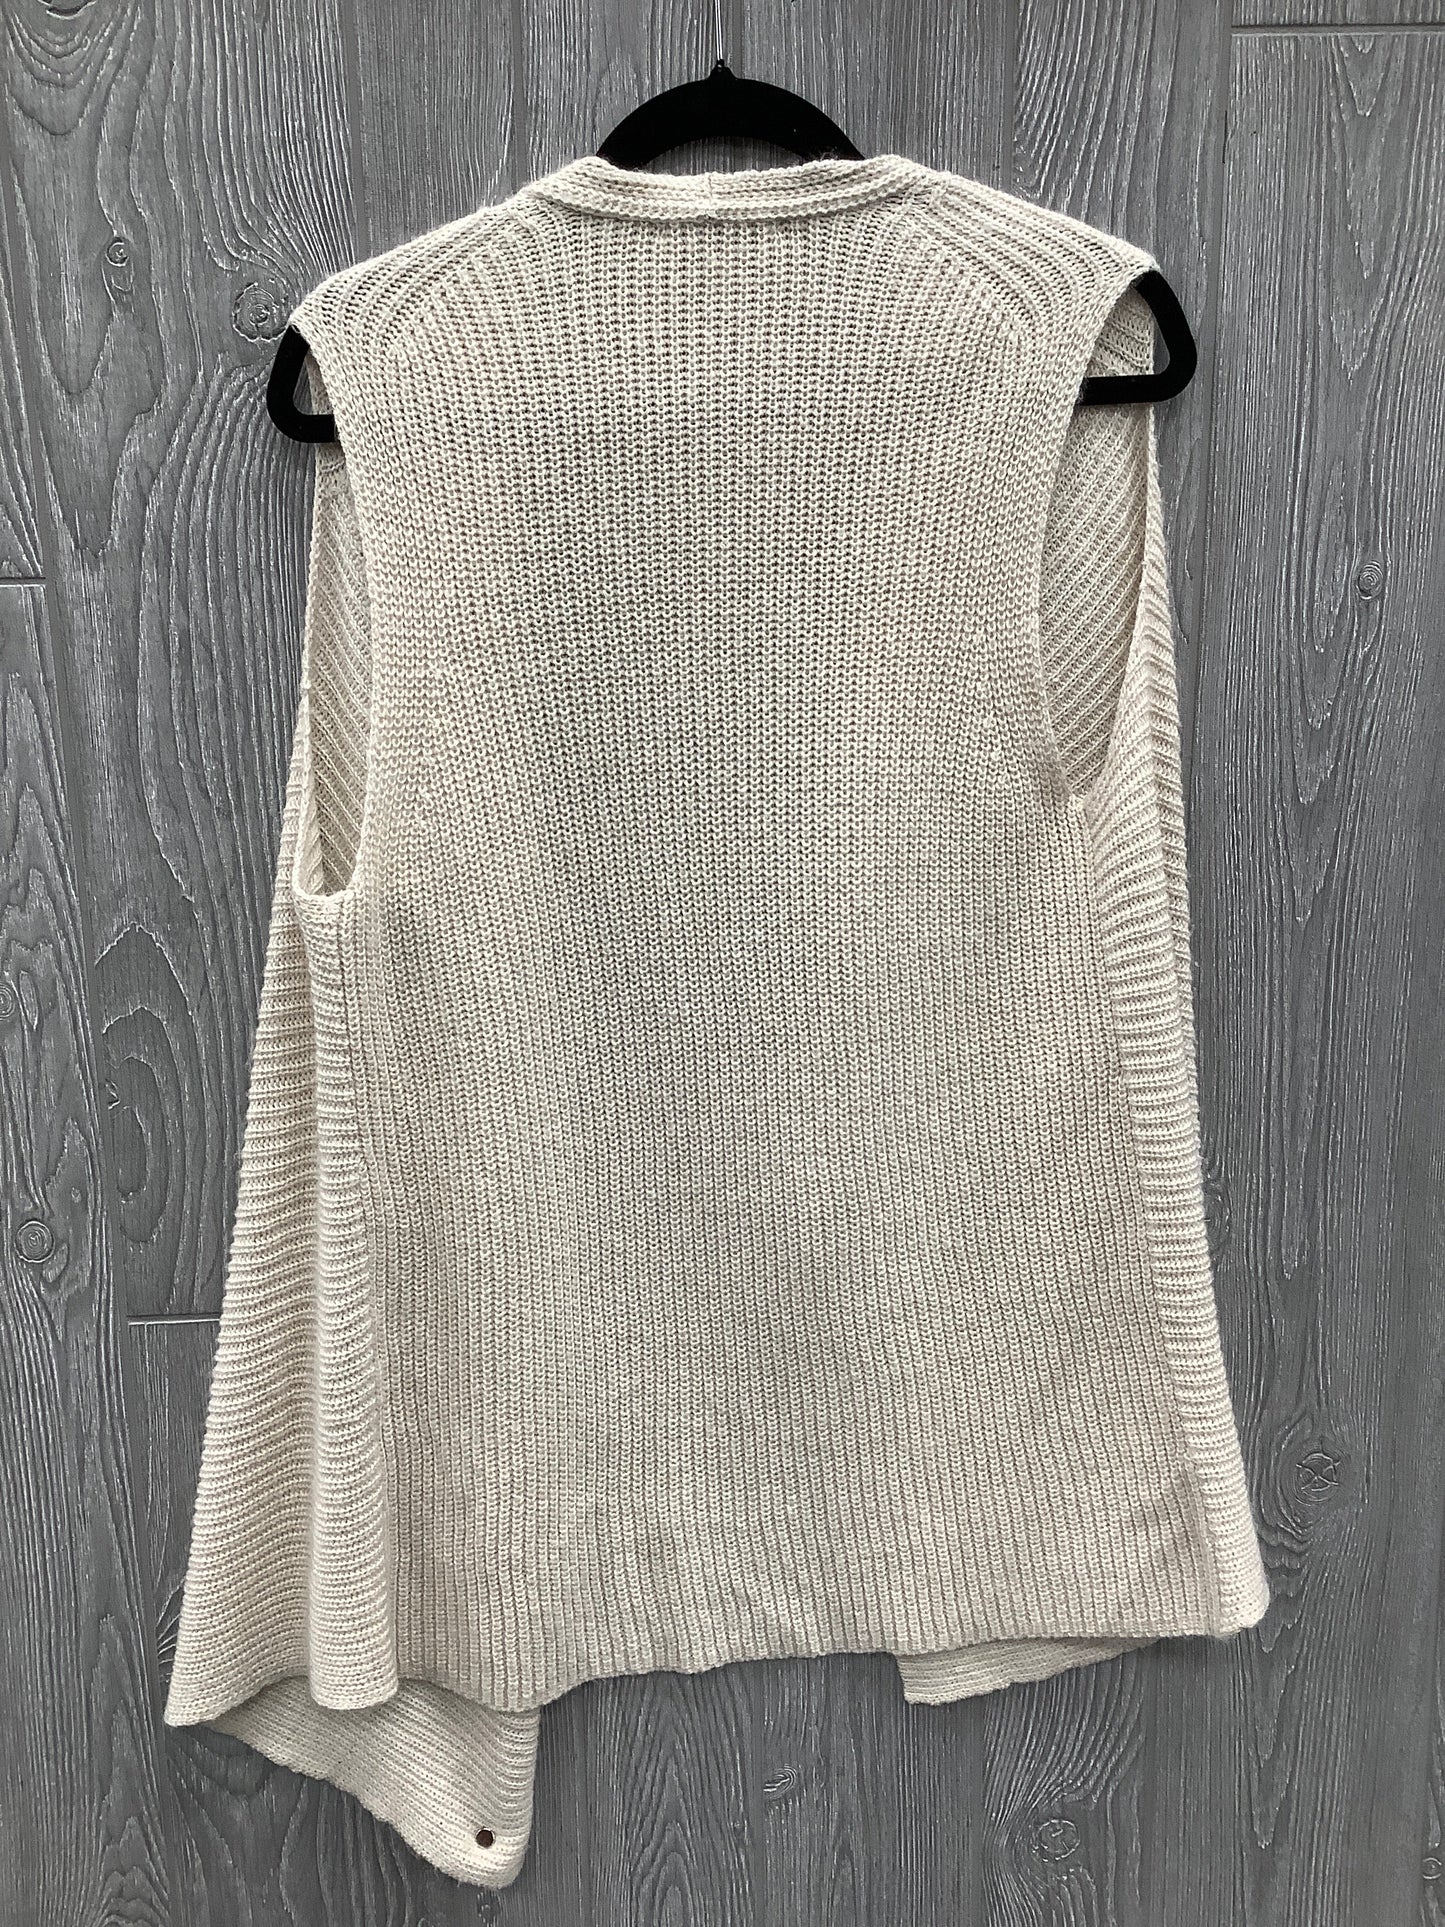 Vest Sweater By Christopher And Banks  Size: M